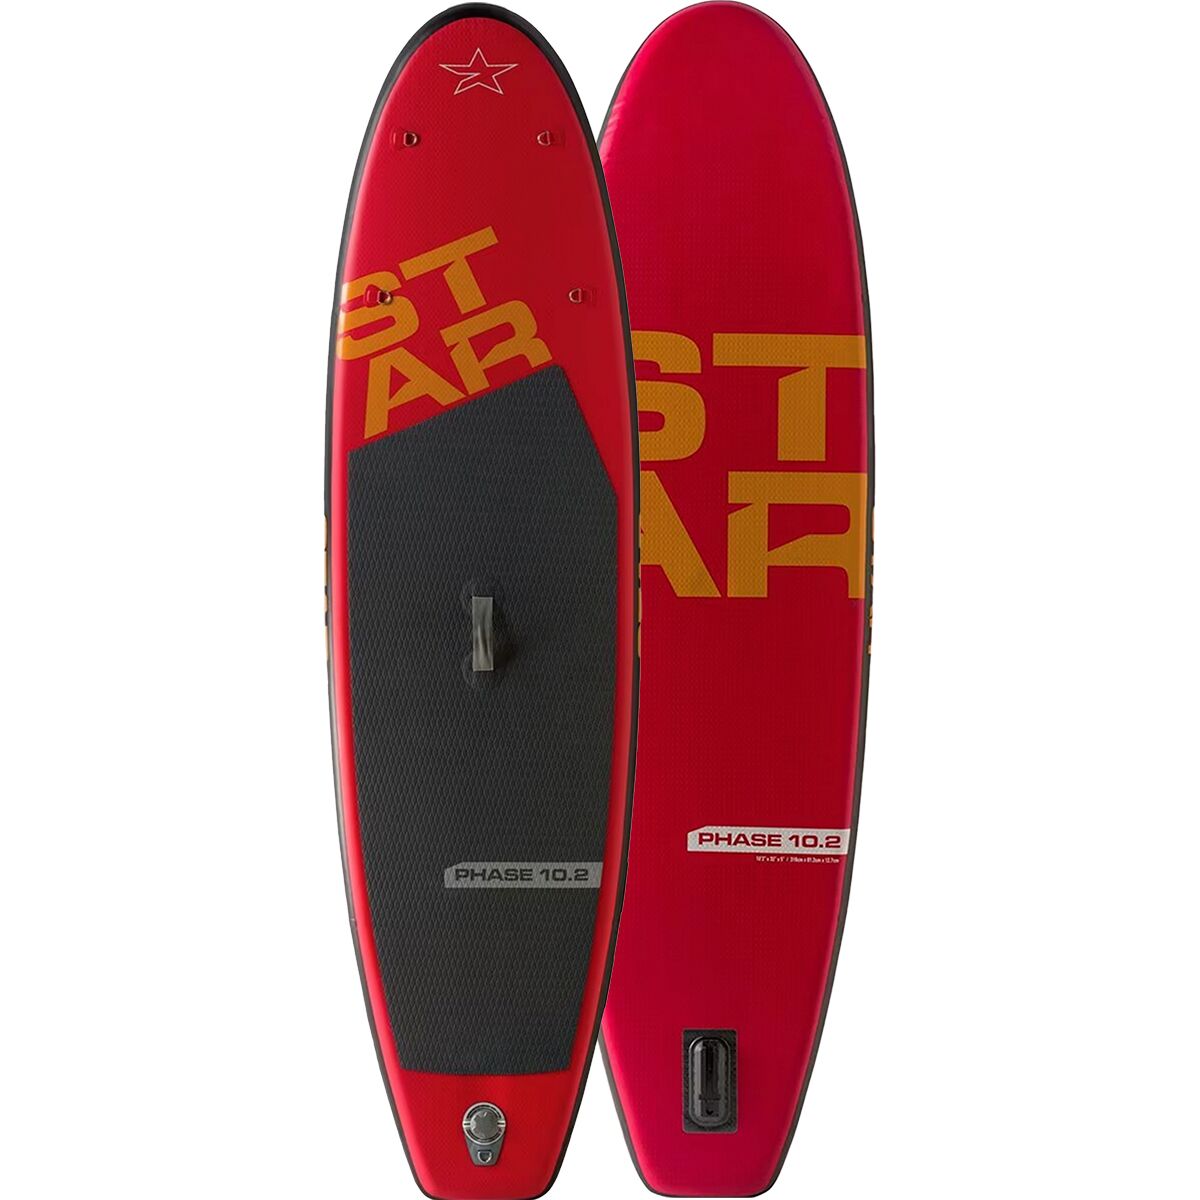 Star Phase Inflatable Stand-Up Paddleboard